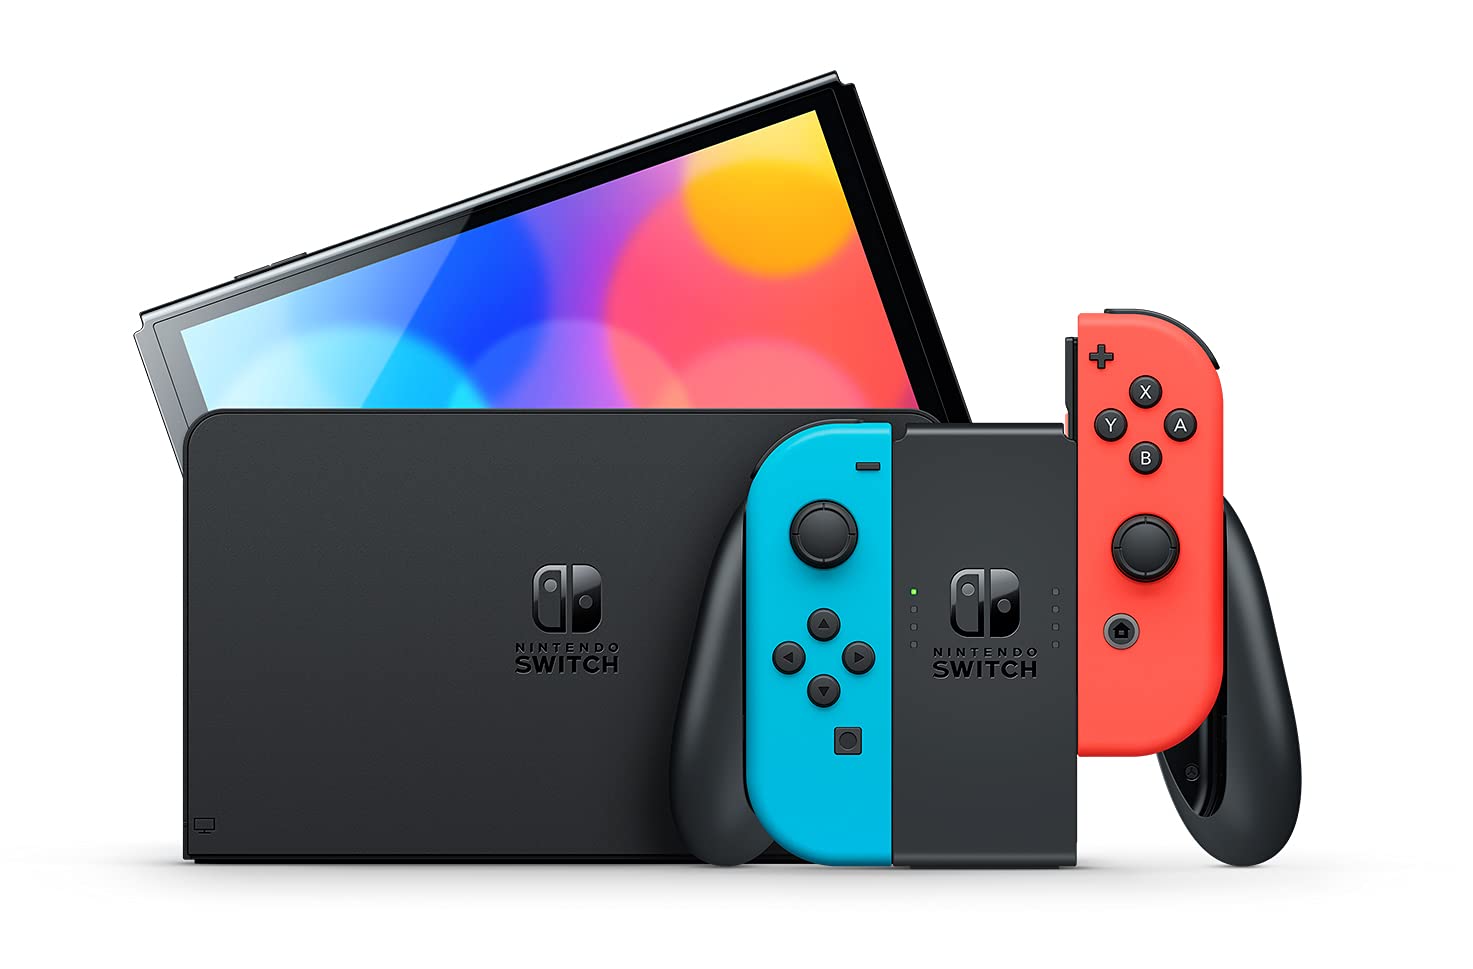 Nintendo Switch OLED Model (Neon Red & Neon Blue Joy-Con, Black Dock) with Microfiber Screen Cleaning Cloth - Pro-Distributing